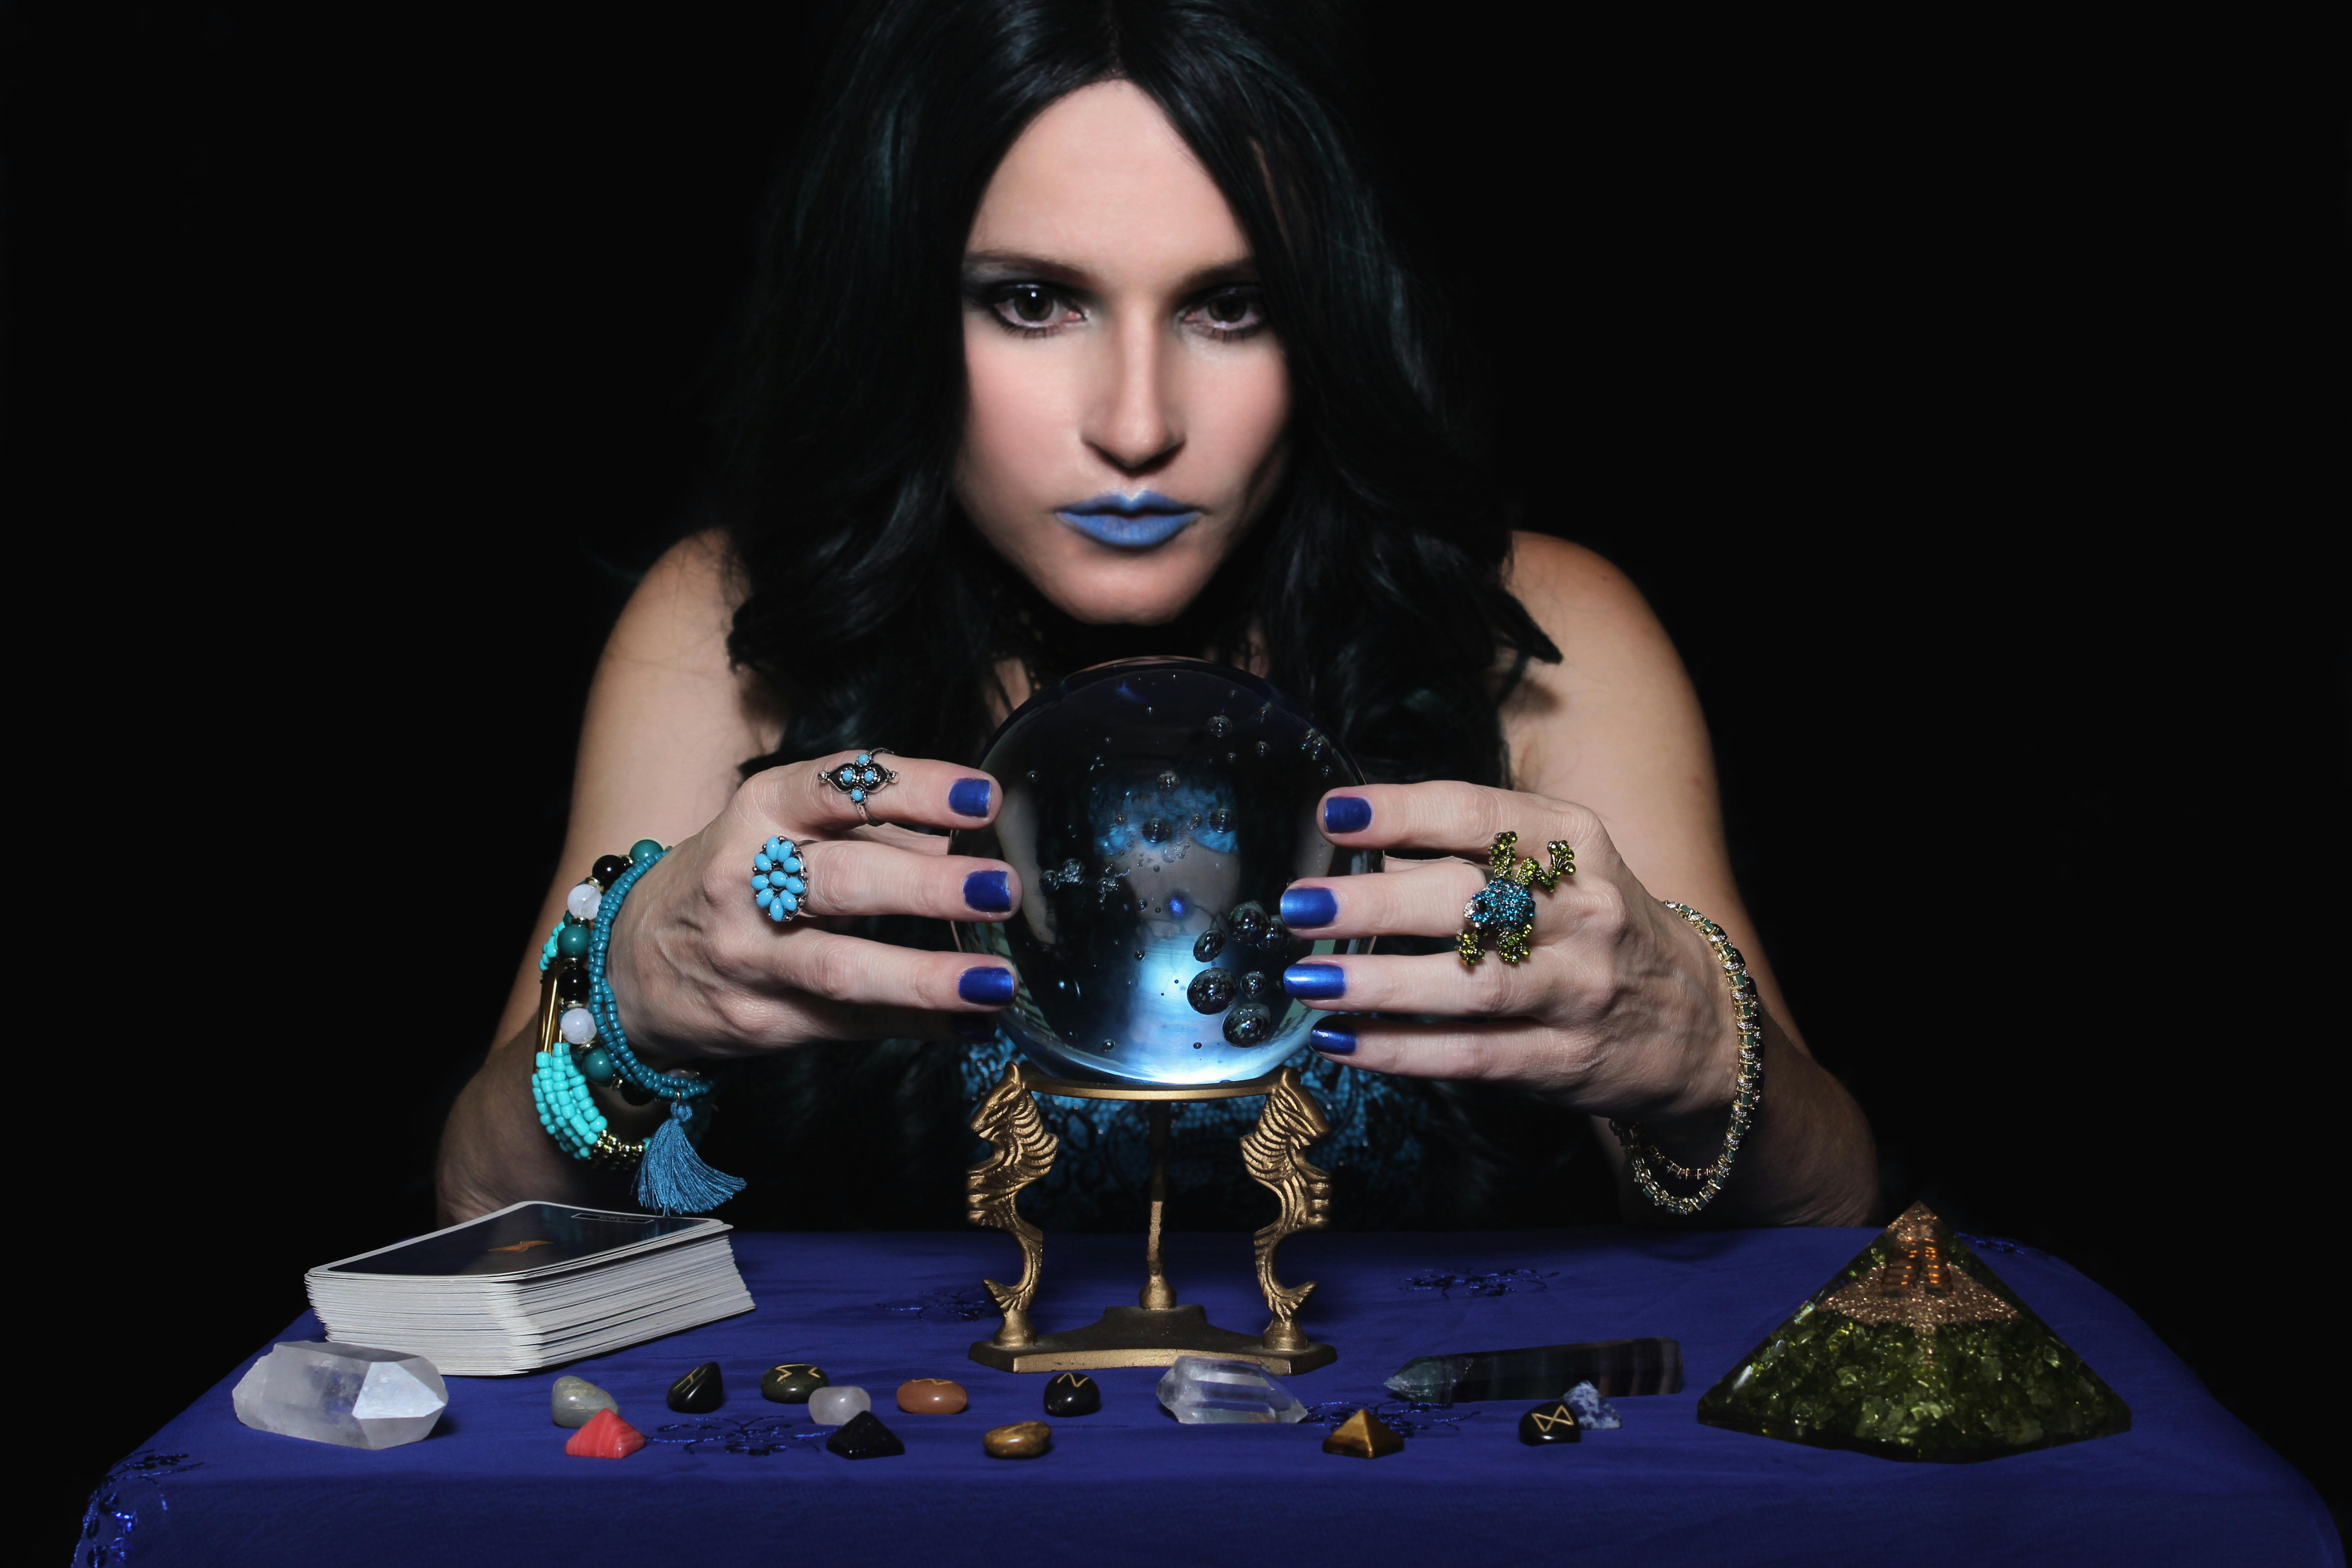 Image of a psychic with a crystal ball